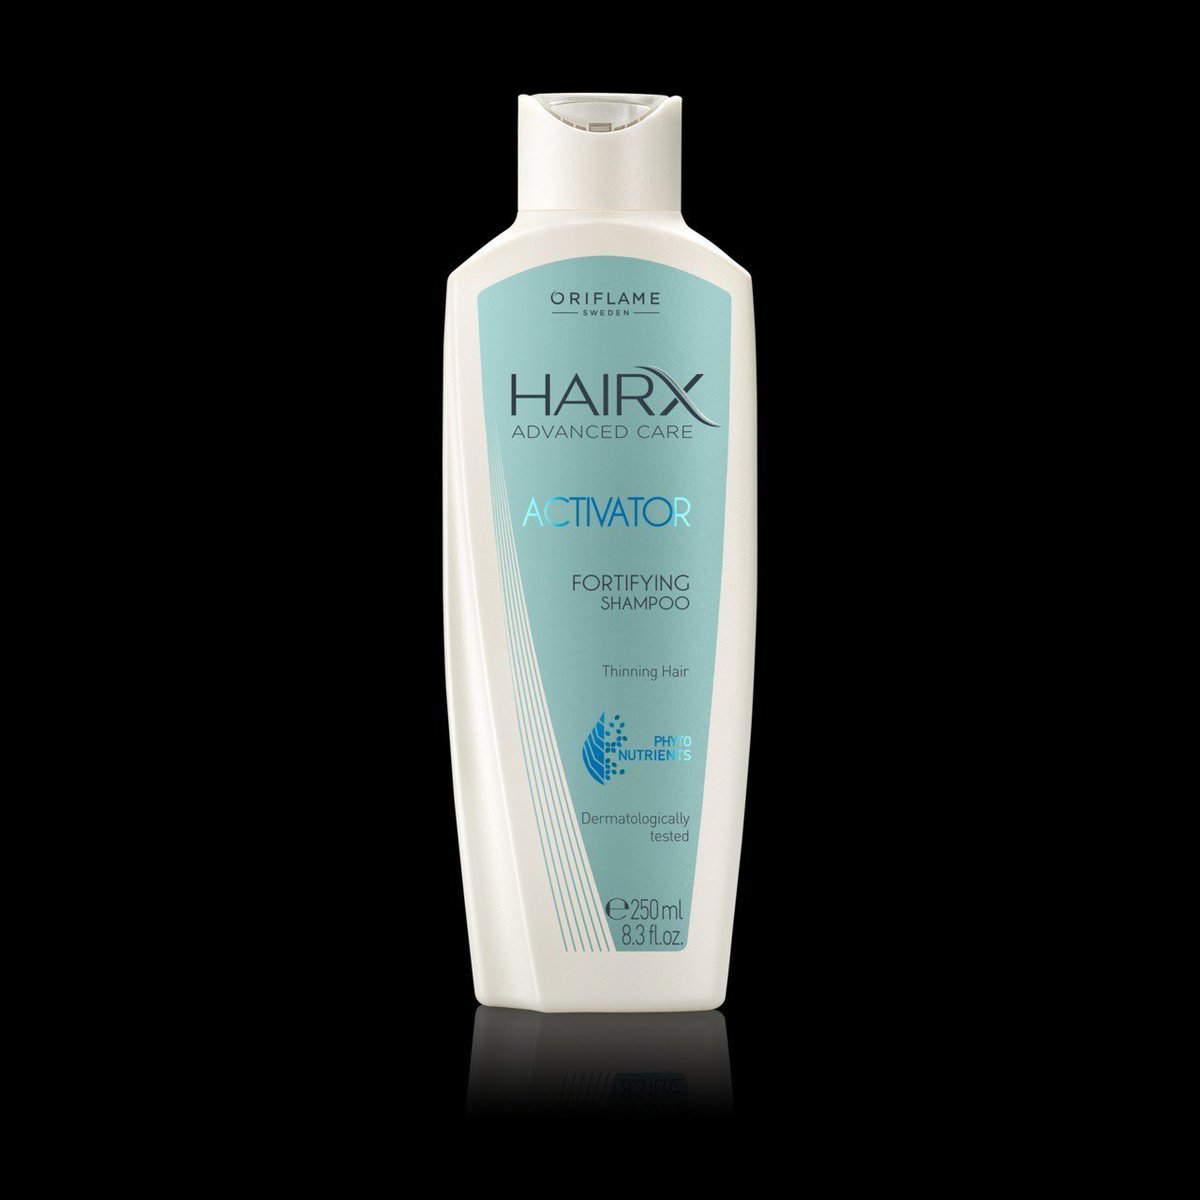 HairX Advanced care activator fortifying Shampoo
£2.95
why not order yours #oriflame #skinbeauty4u #brexit 
#workfromhome #Oriflame50 #OriflameOnMe #MyNovAge #Oriflame #WellnessbyOriflame #theONE #GiordaniGold #LoveNature